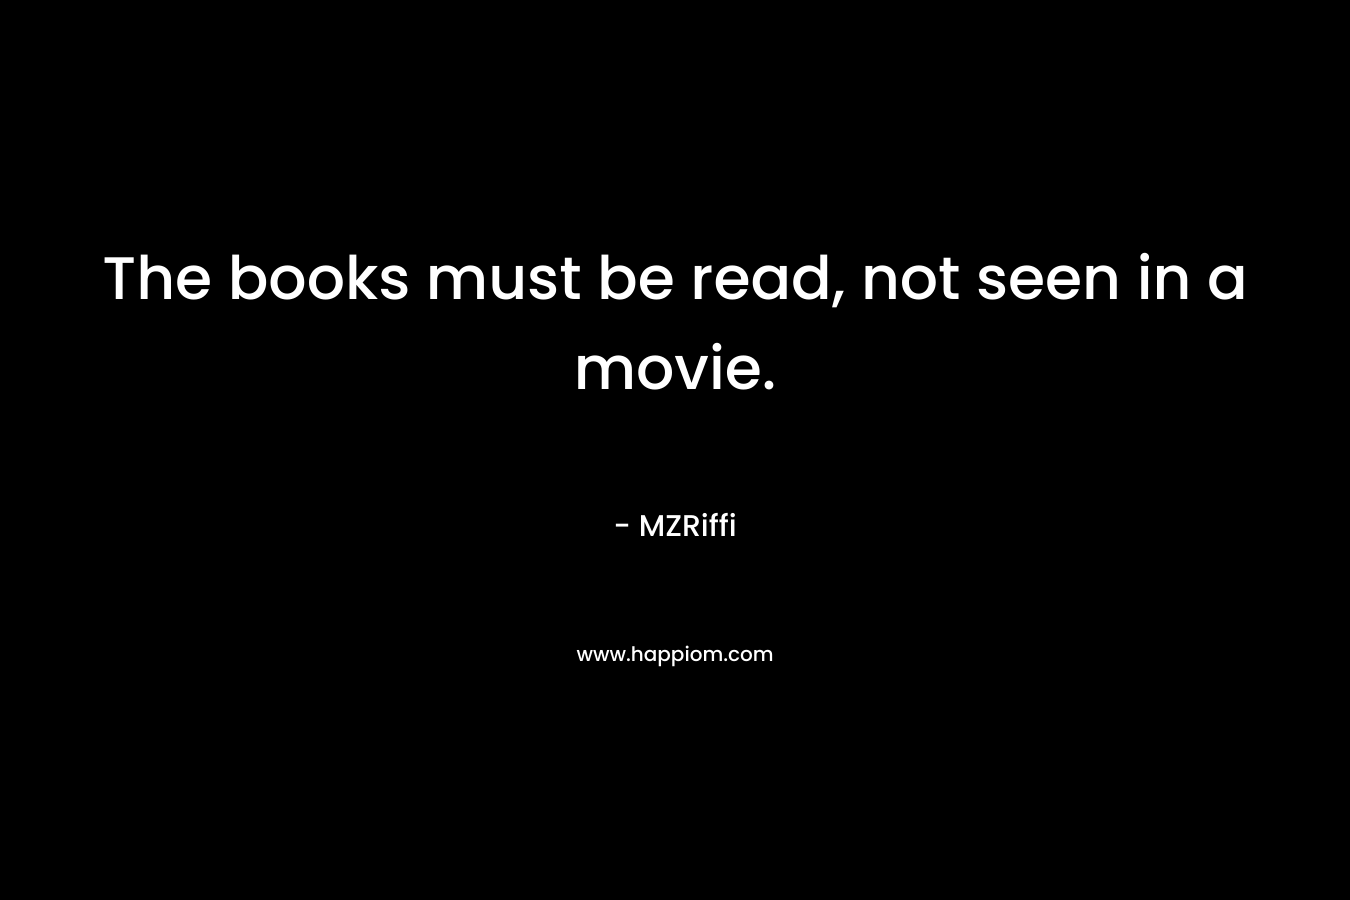 The books must be read, not seen in a movie. – MZRiffi